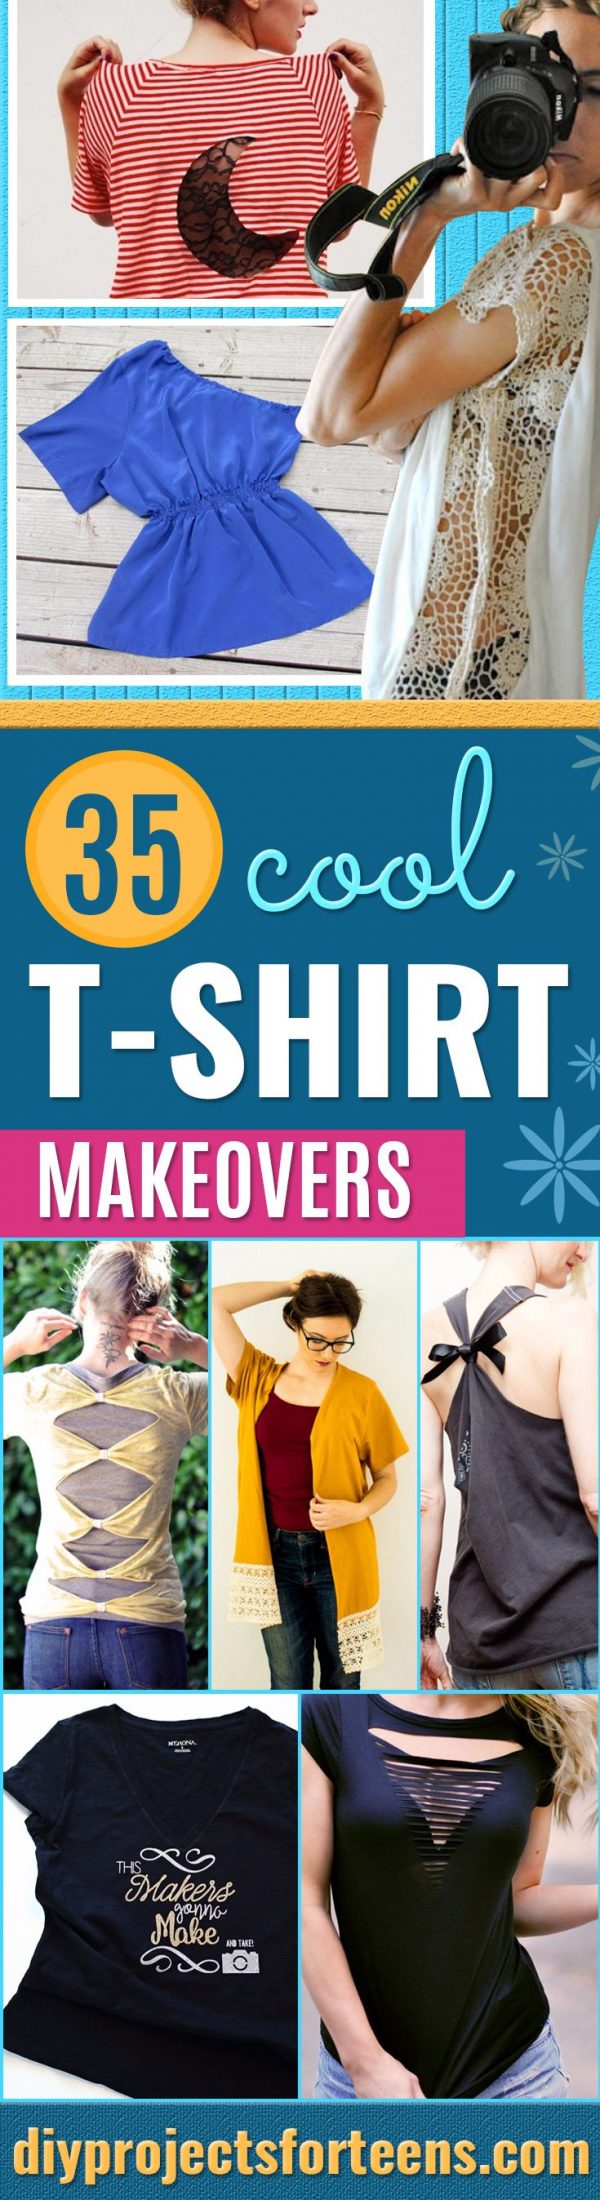 DIY T-Shirt Makeovers - Fun Upcycle Ideas for Tees - Cheap Clothes to Make- How To Make Simple Awesome Summer Style Projects - Cute Sleeve and Neckline Ideas - Cheap and Easy Ways To Upcycle Tshirts for Fun Clothes and Fashion - Quick Projects for Teens and Teenagers on A Budget #teenfashion #tshirtideas #teencrafts